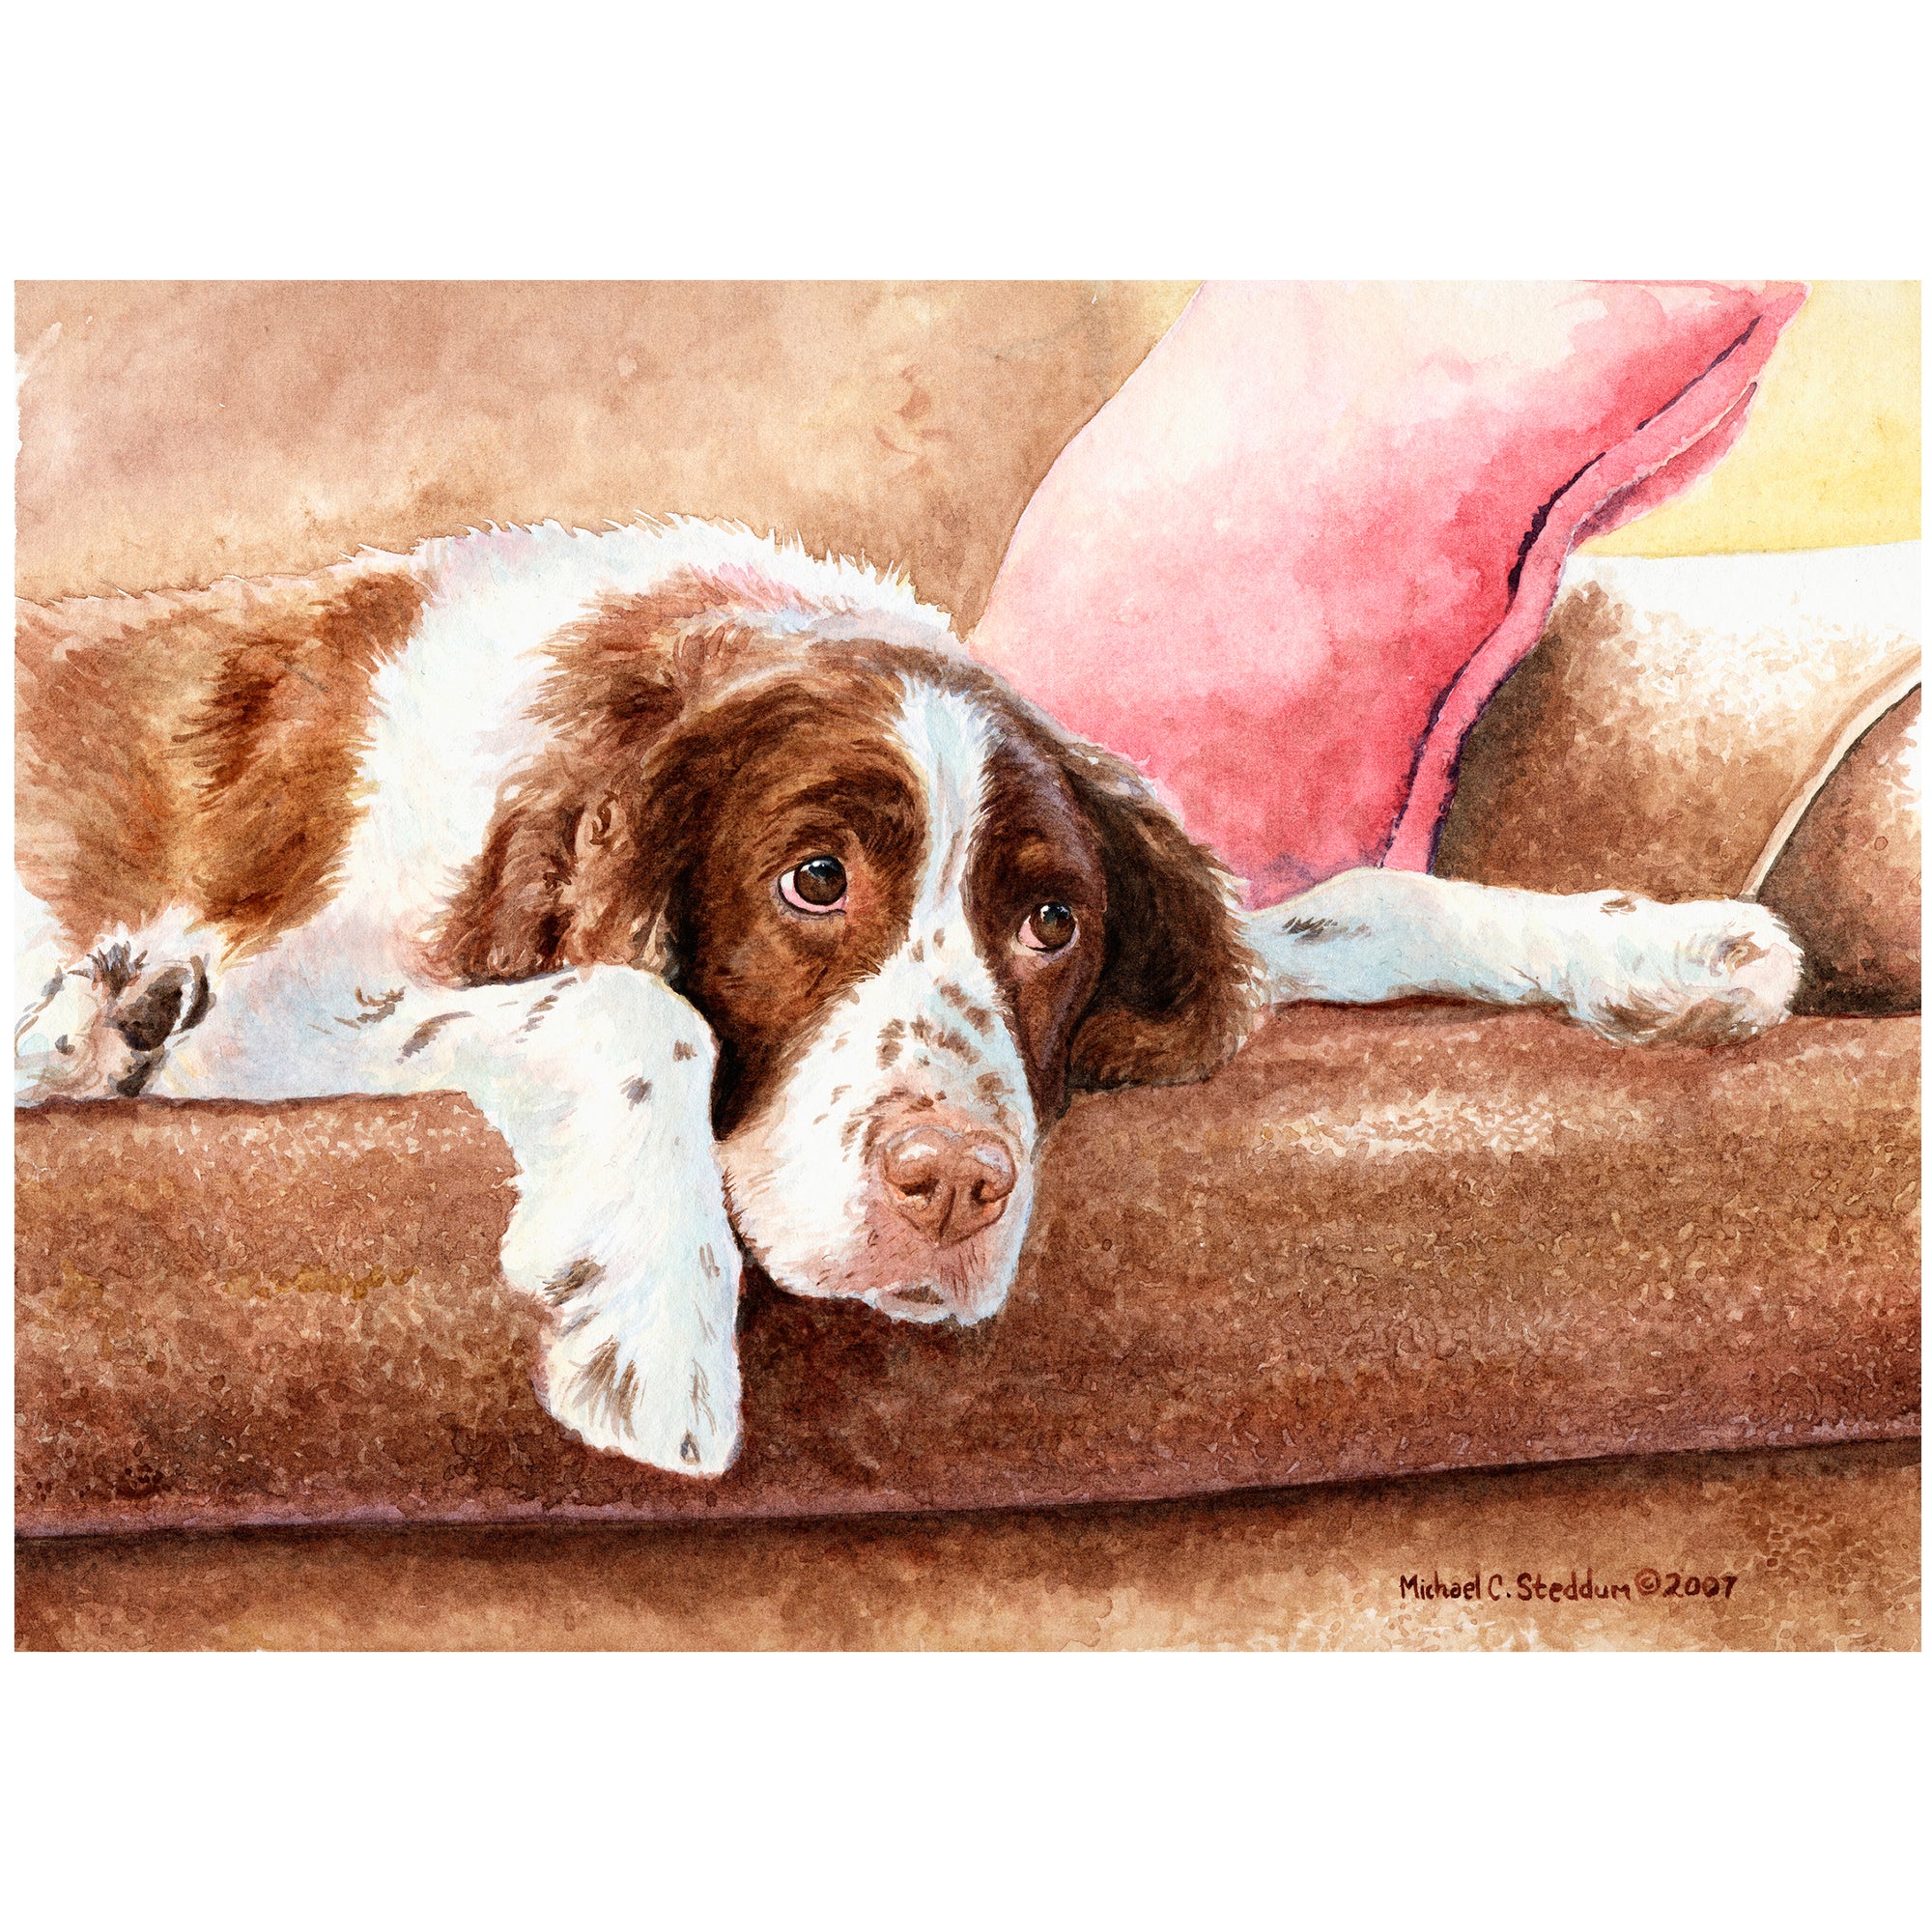 Springer Spaniel Art Reproduction Print – “Resting” by Michael Steddum - Limited Edition Signed and Numbered Springer Dog Art Print